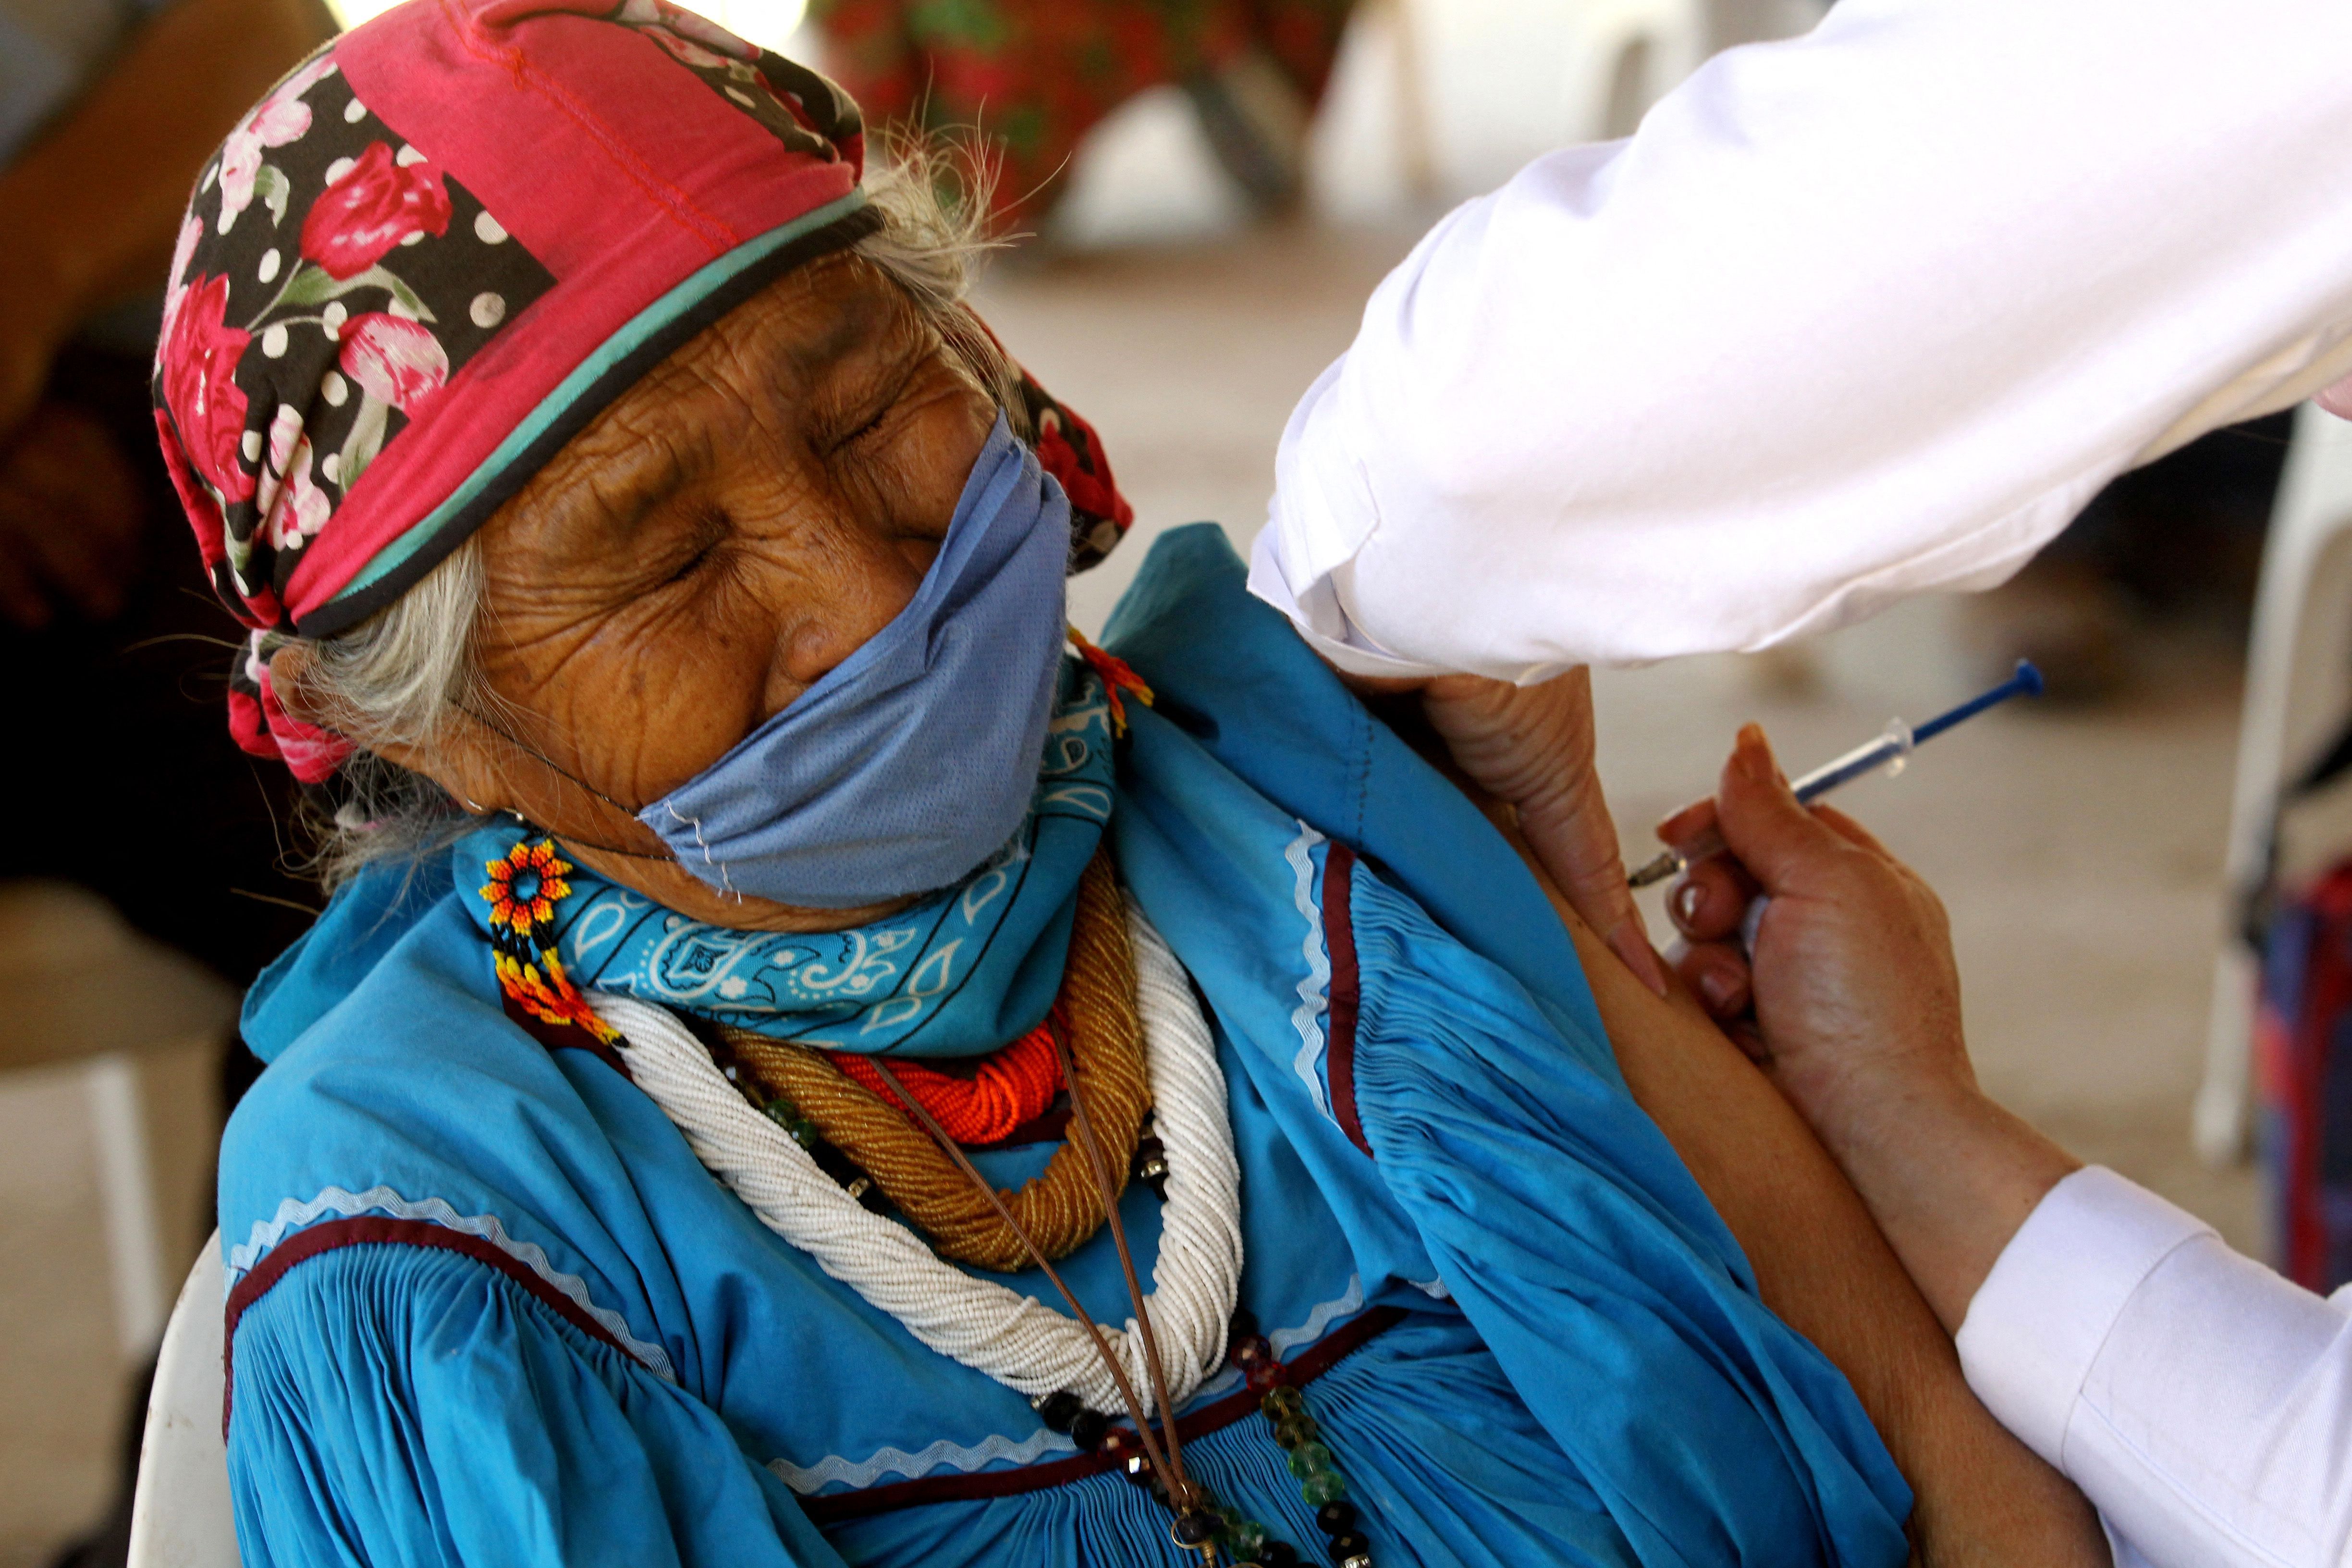 A Wixarica indigenous woman is inoculated against COVID-19 at the vaccination center installed in the town of Nuevo Colonia, in Mezquitic, Jalisco state, Mexico, on April 16